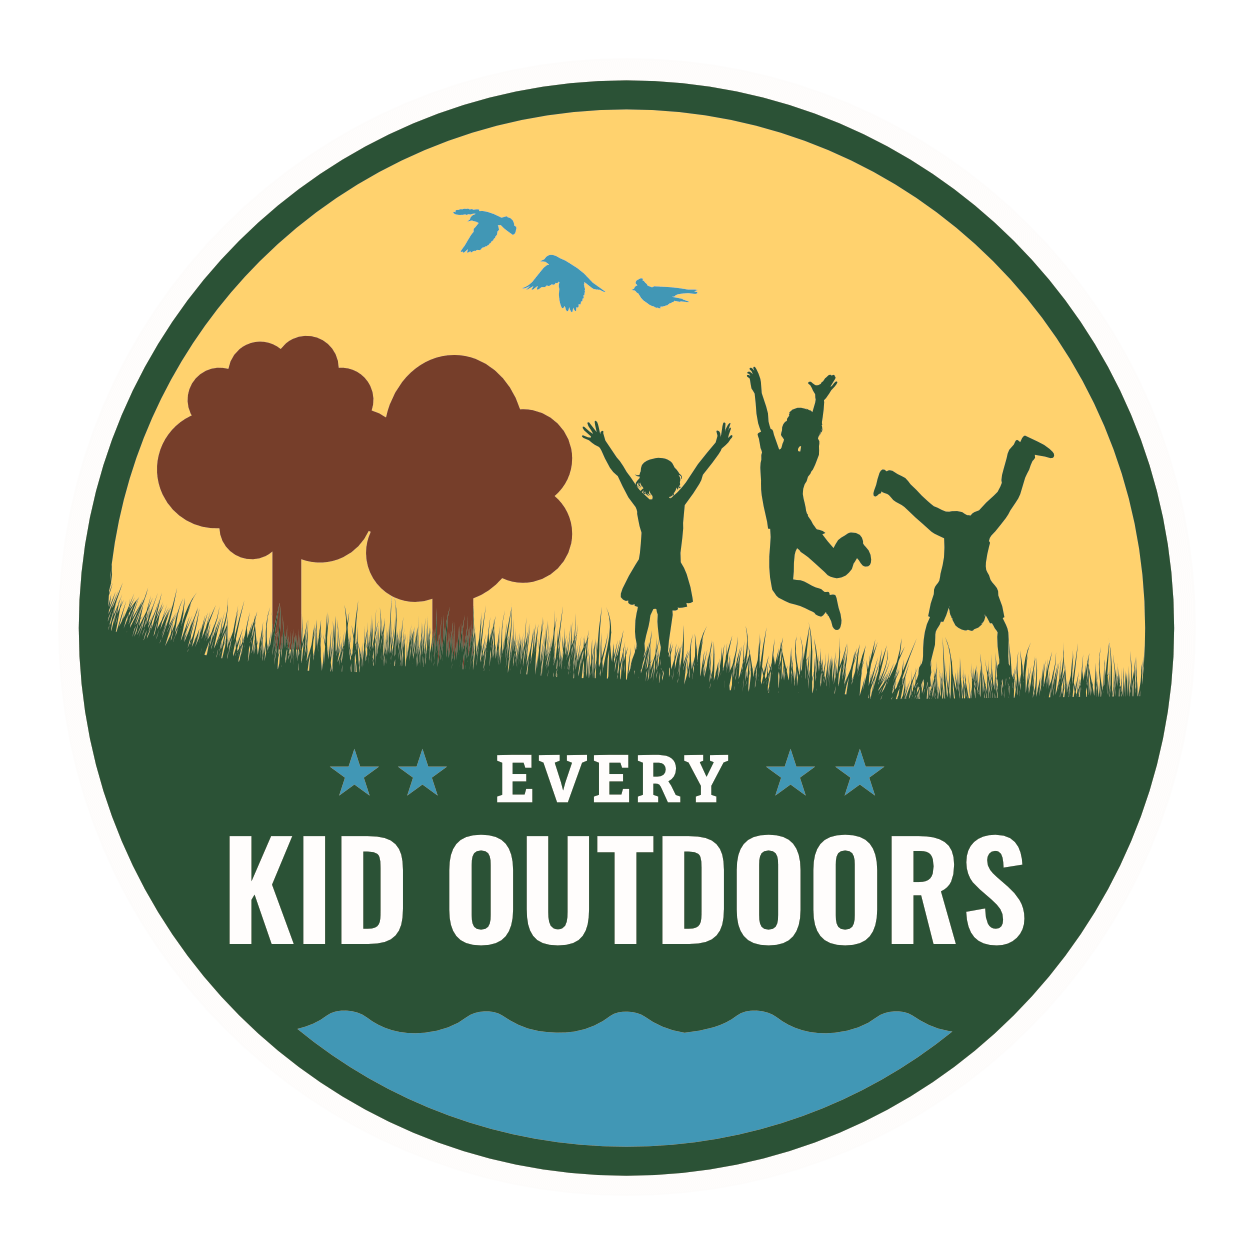 the logo for every kid outdoors.